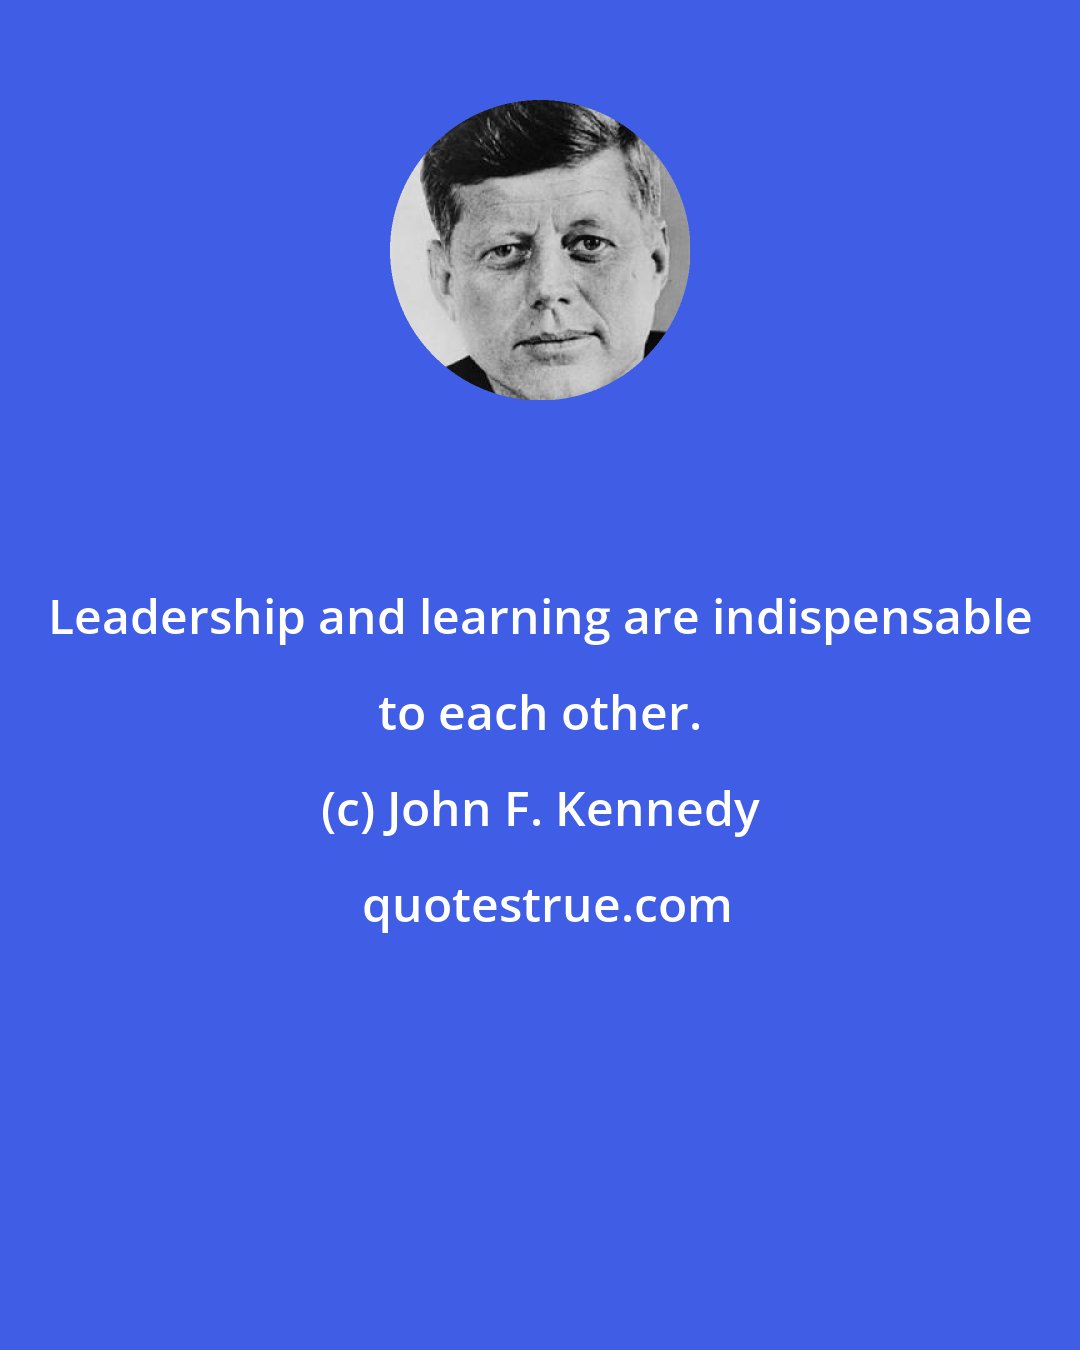 John F. Kennedy: Leadership and learning are indispensable to each other.